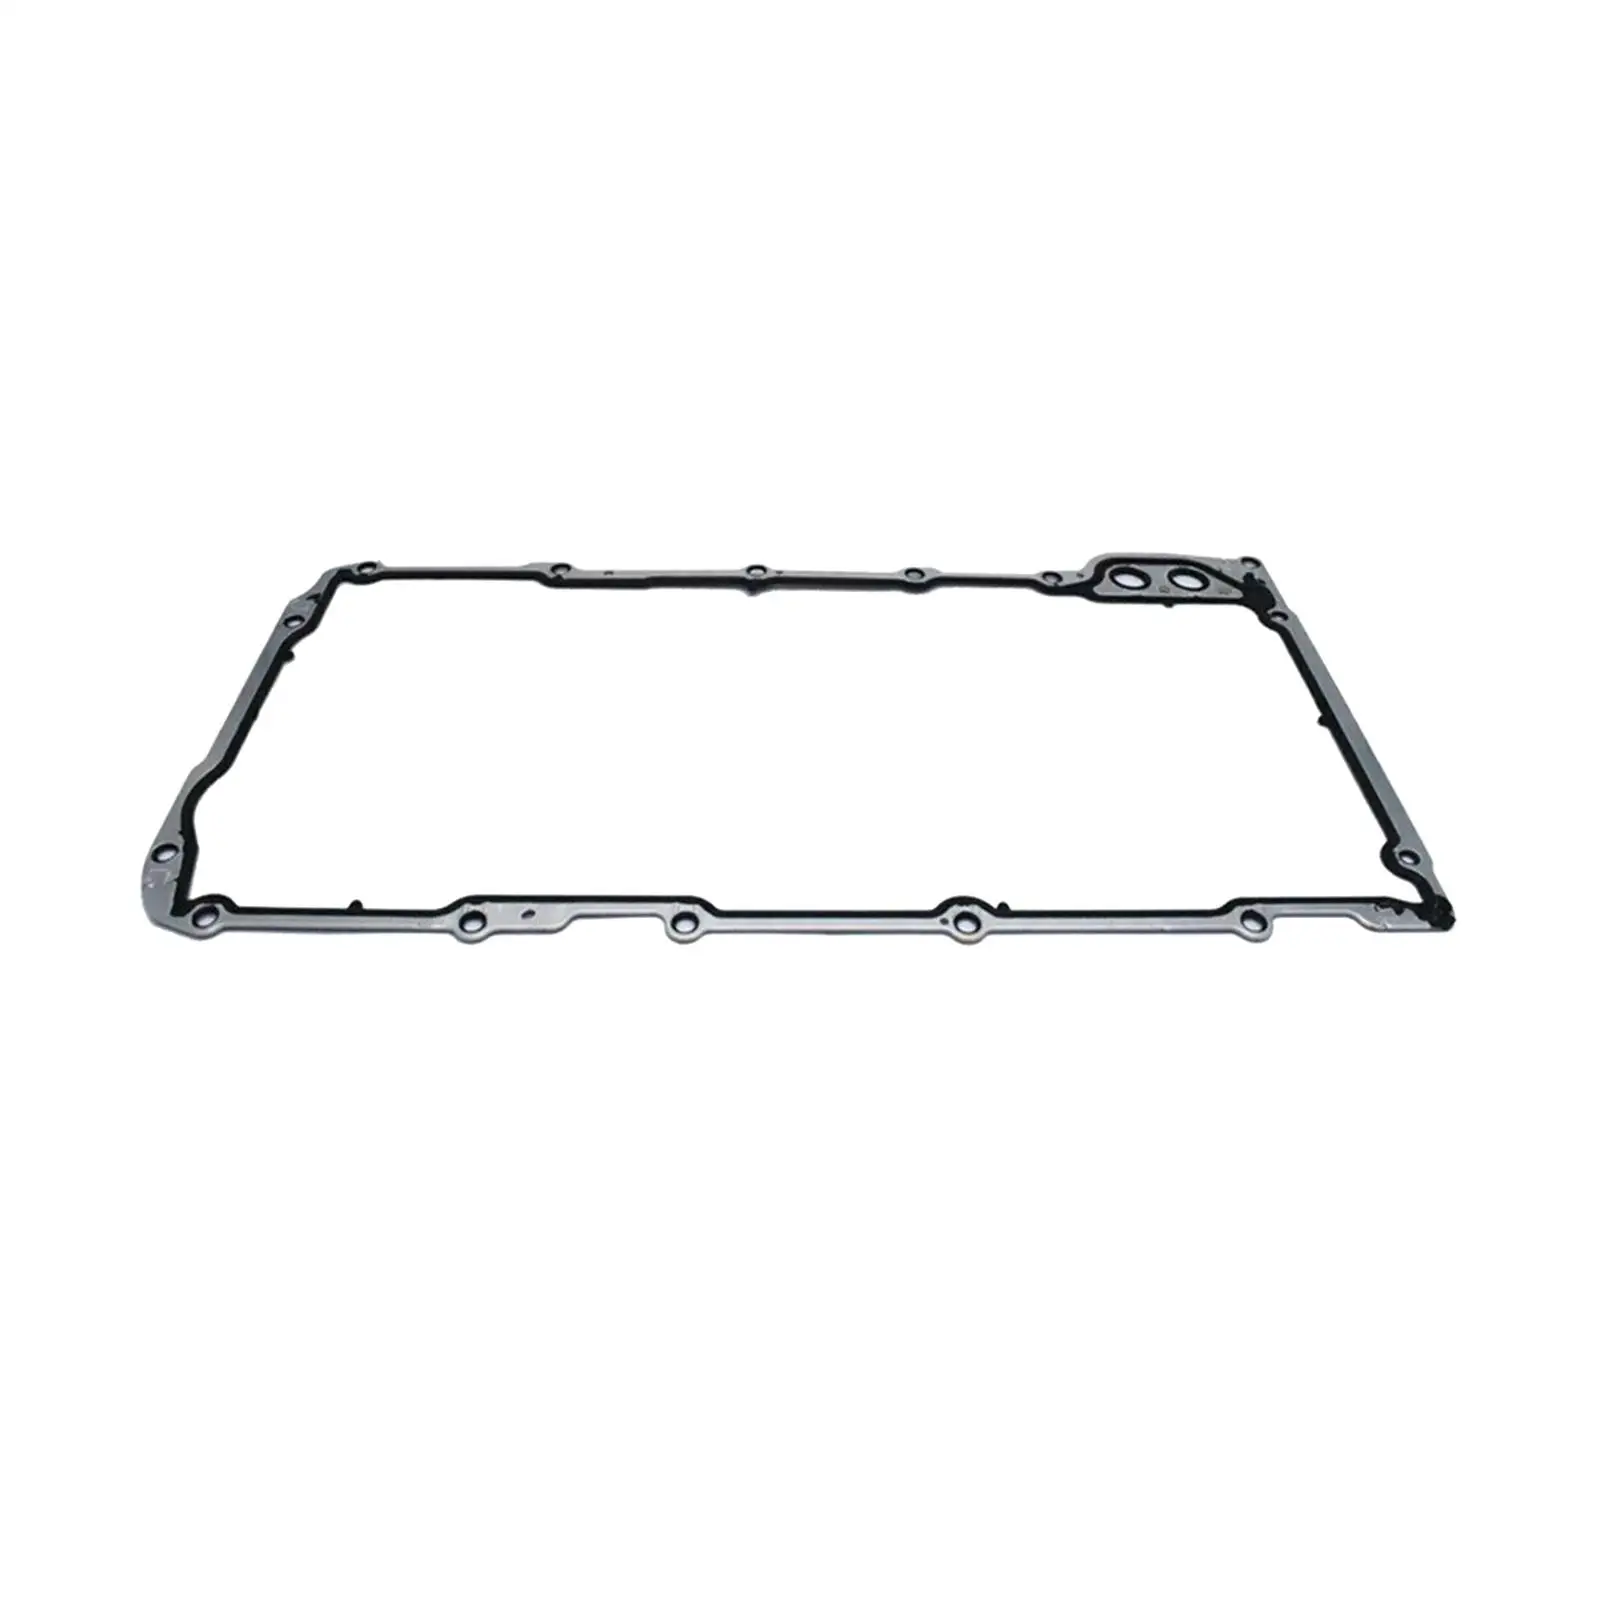 Oil Pan Gasket OS30693R for Hummer Easy to Install Car Accessories